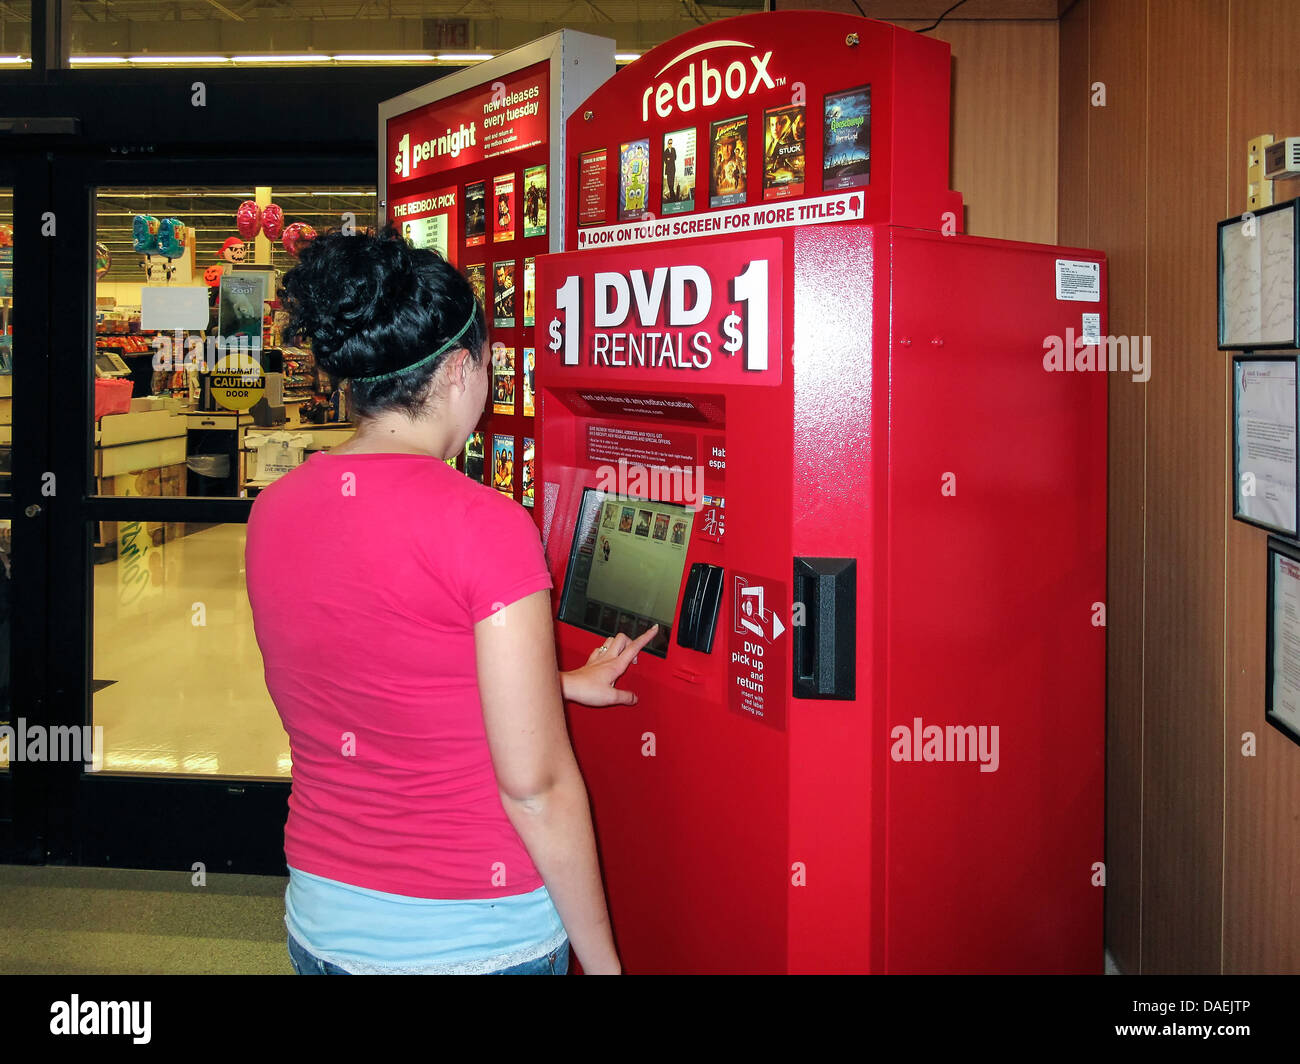 Best Movies on Redbox Right Now: Top 30 New Rentals